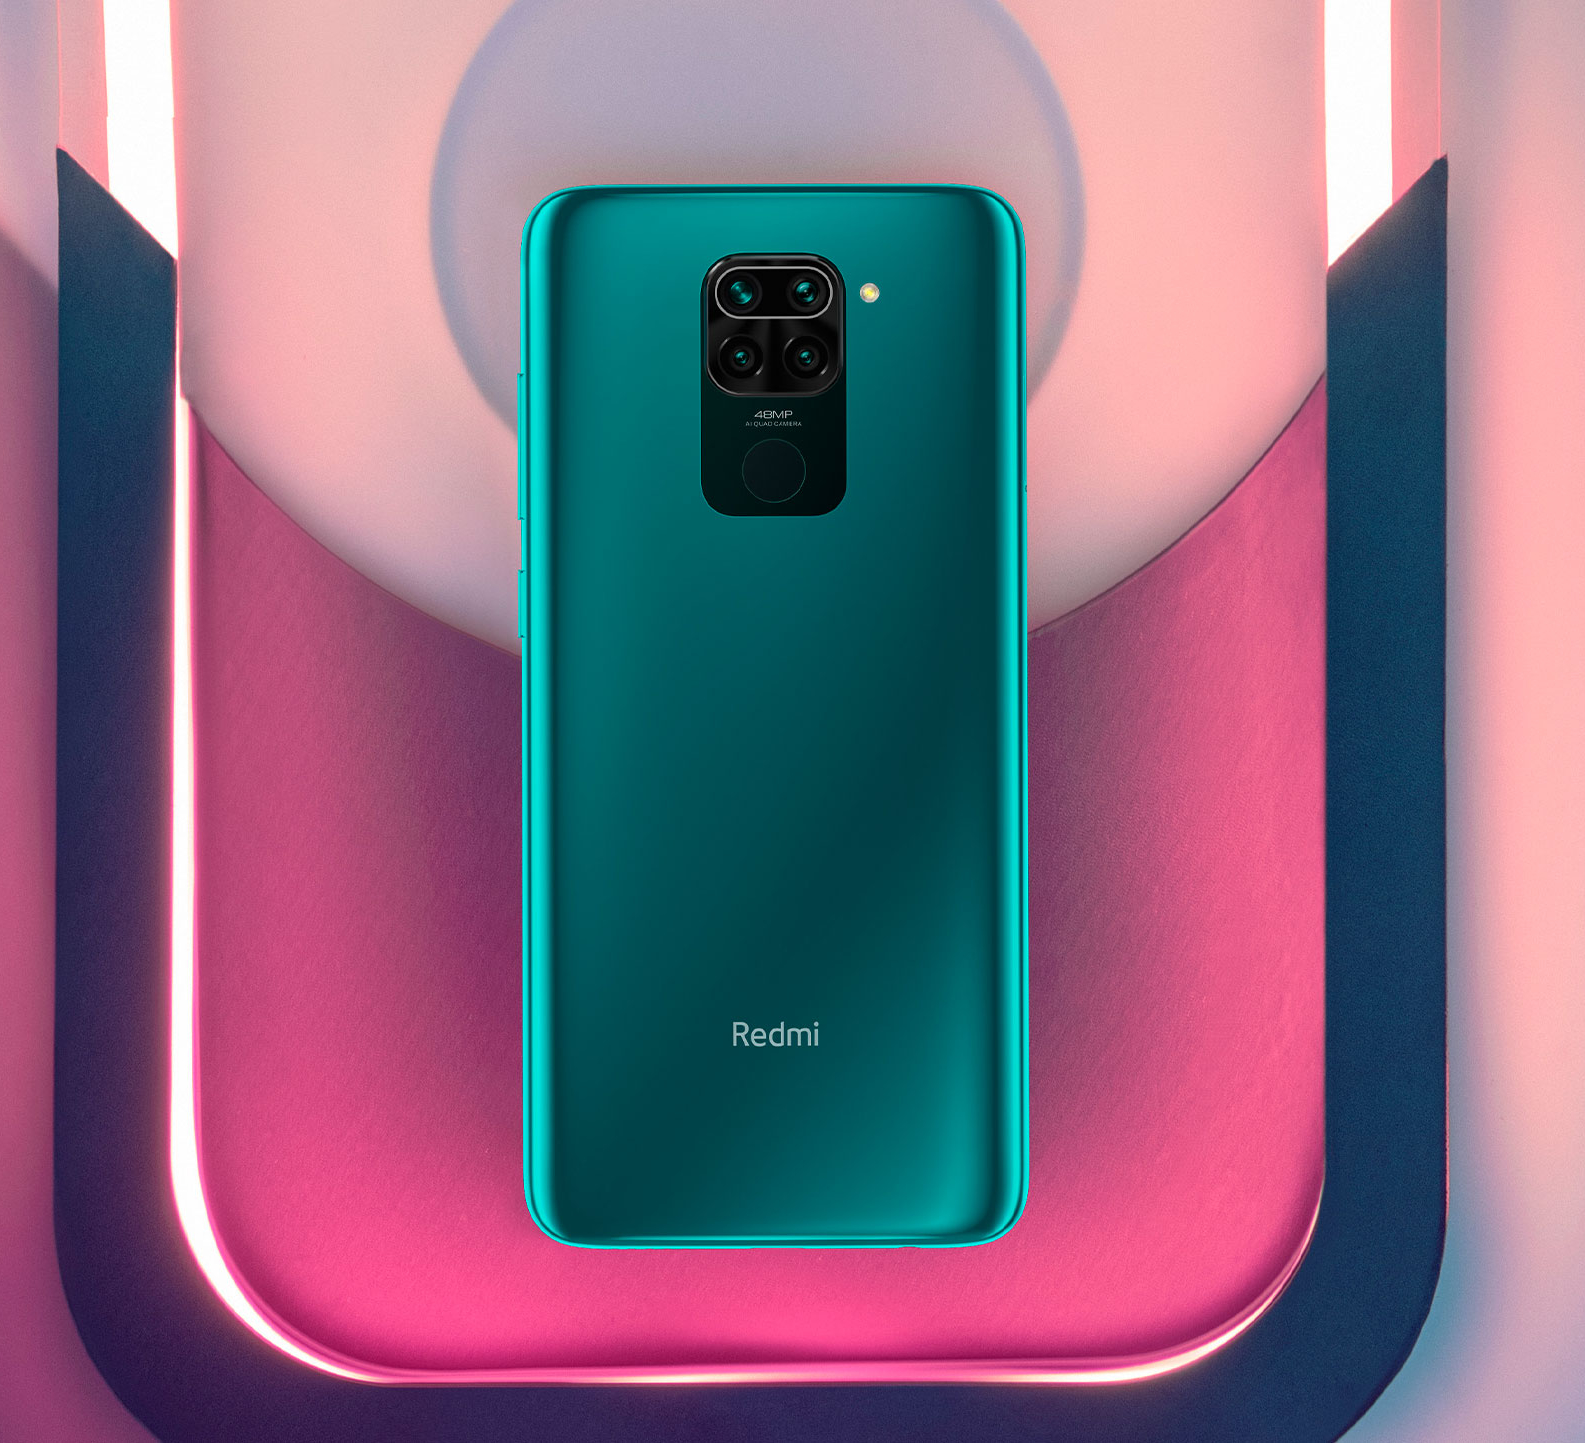 MIUI 12.5 Enhanced Edition lands on the Xiaomi Redmi Note 9 in India .